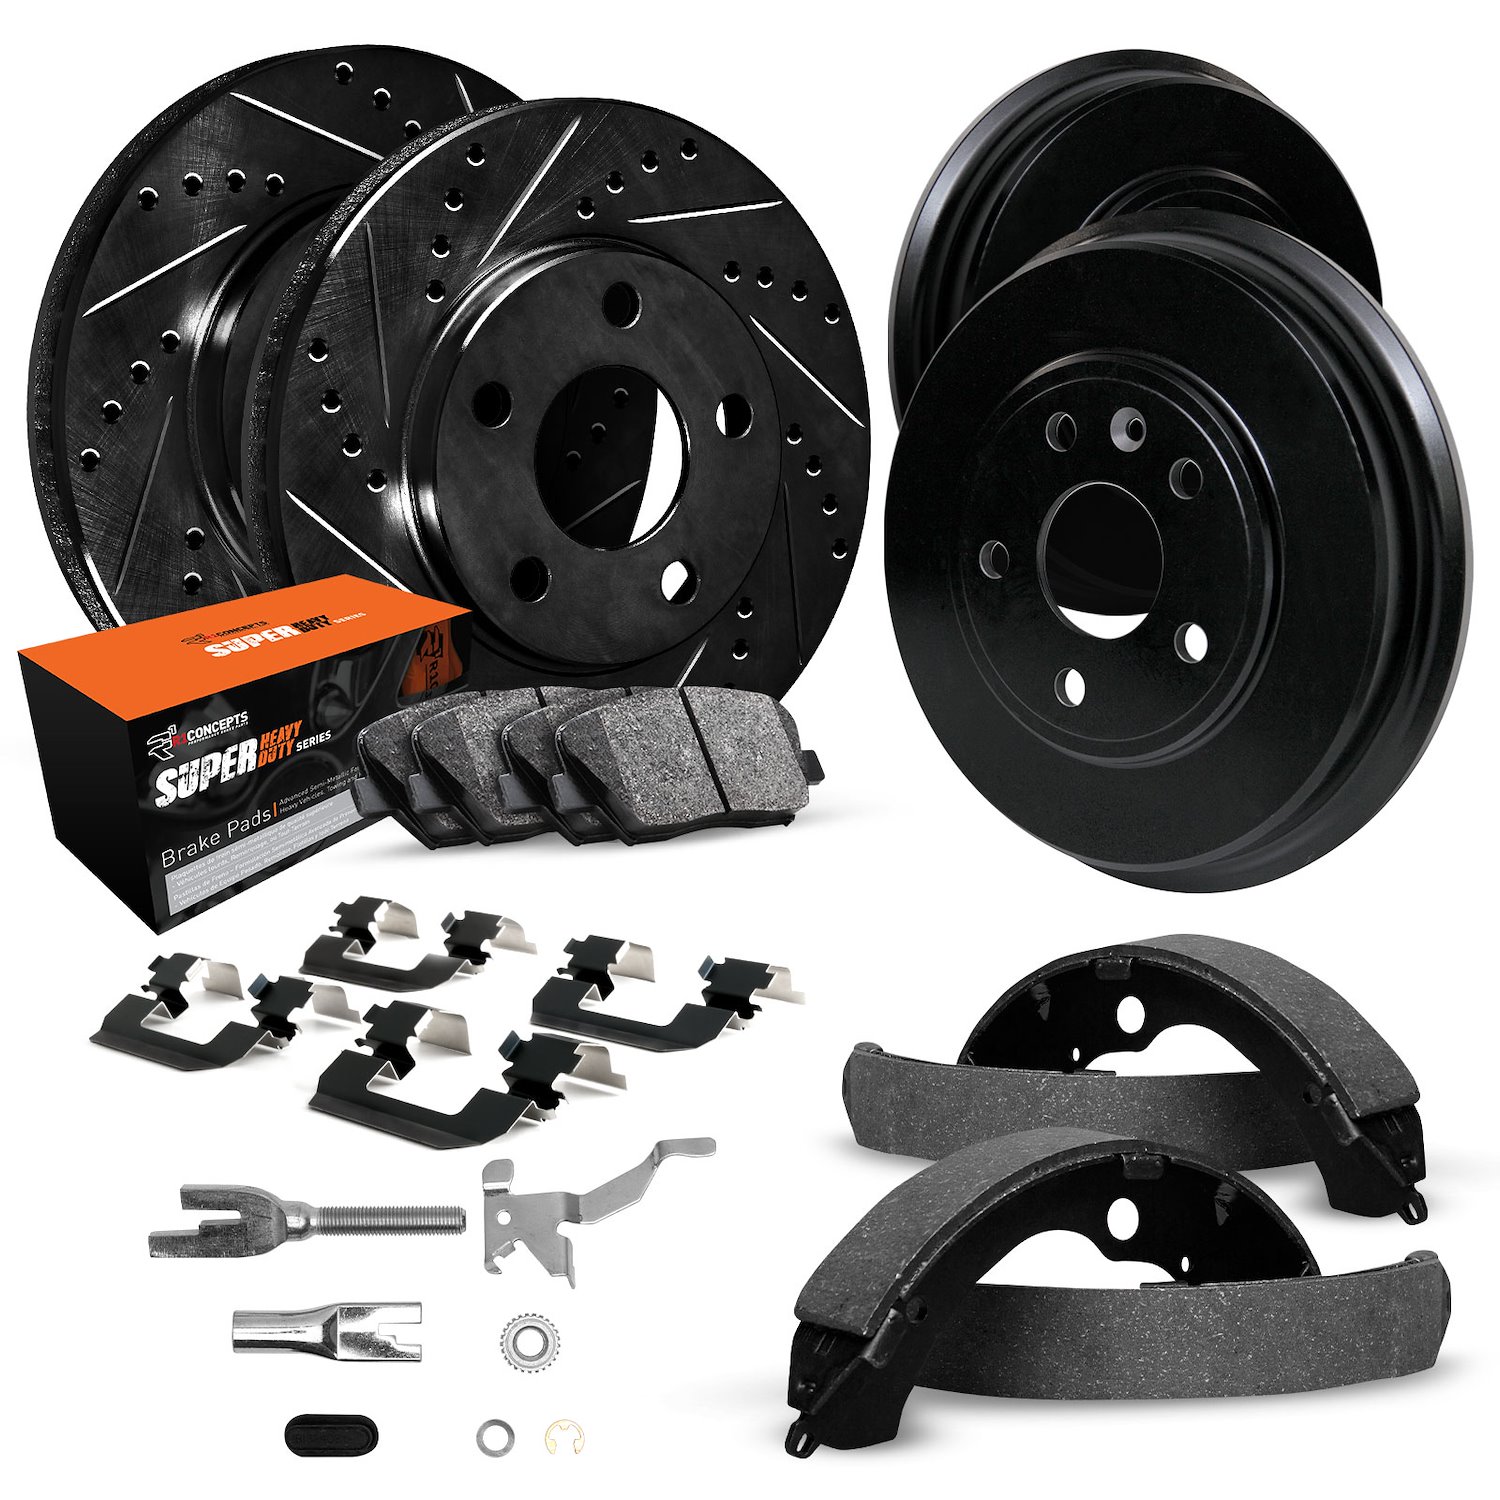 E-Line Slotted Black Brake Rotor & Drum Set w/Super-Duty Pads, Shoes, Hardware/Adjusters, 1987-1991 Ford/Lincoln/Mercury/Mazda